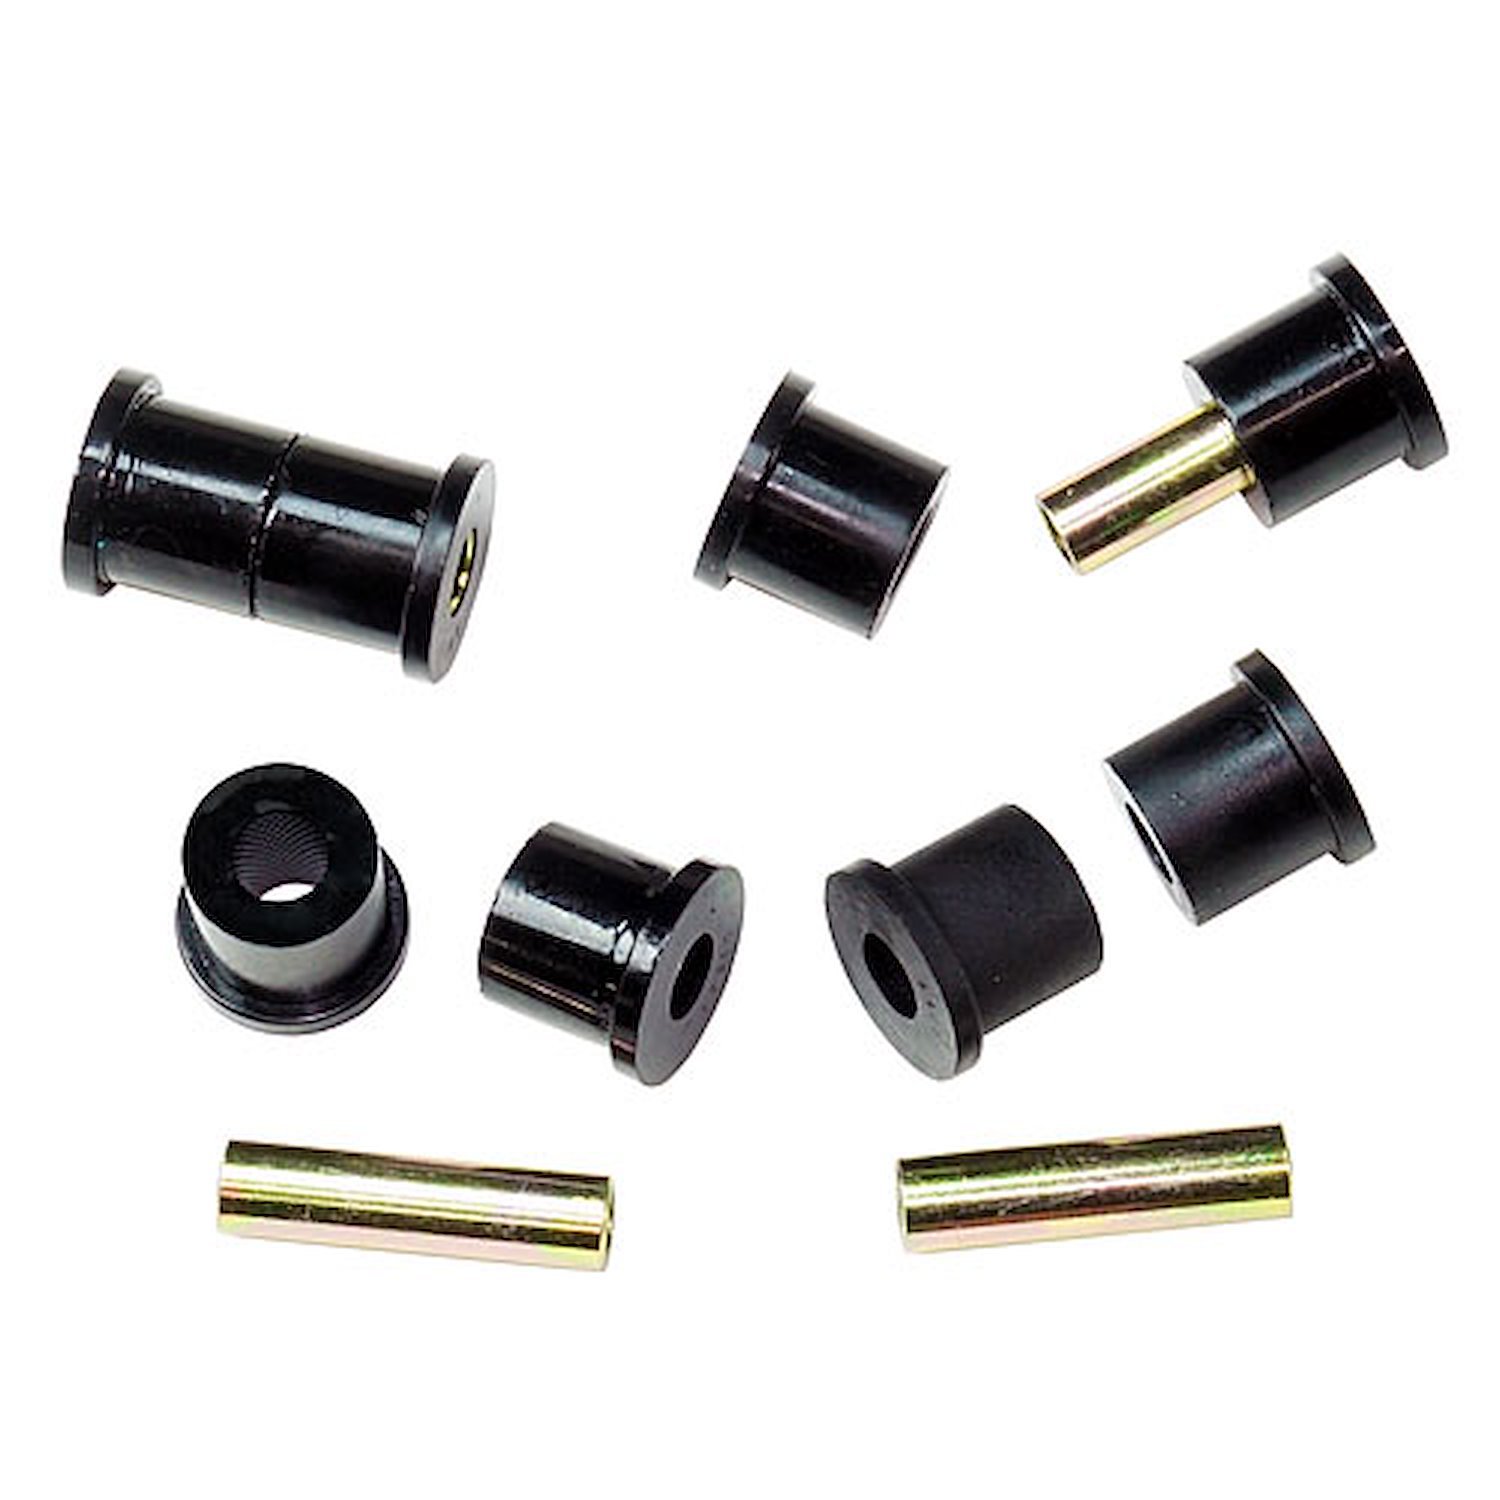 Leaf Spring Bushing Rear Stock PN[01-324/01-325/01-326/01-335/01-336] Only Up To 2800 lbs.